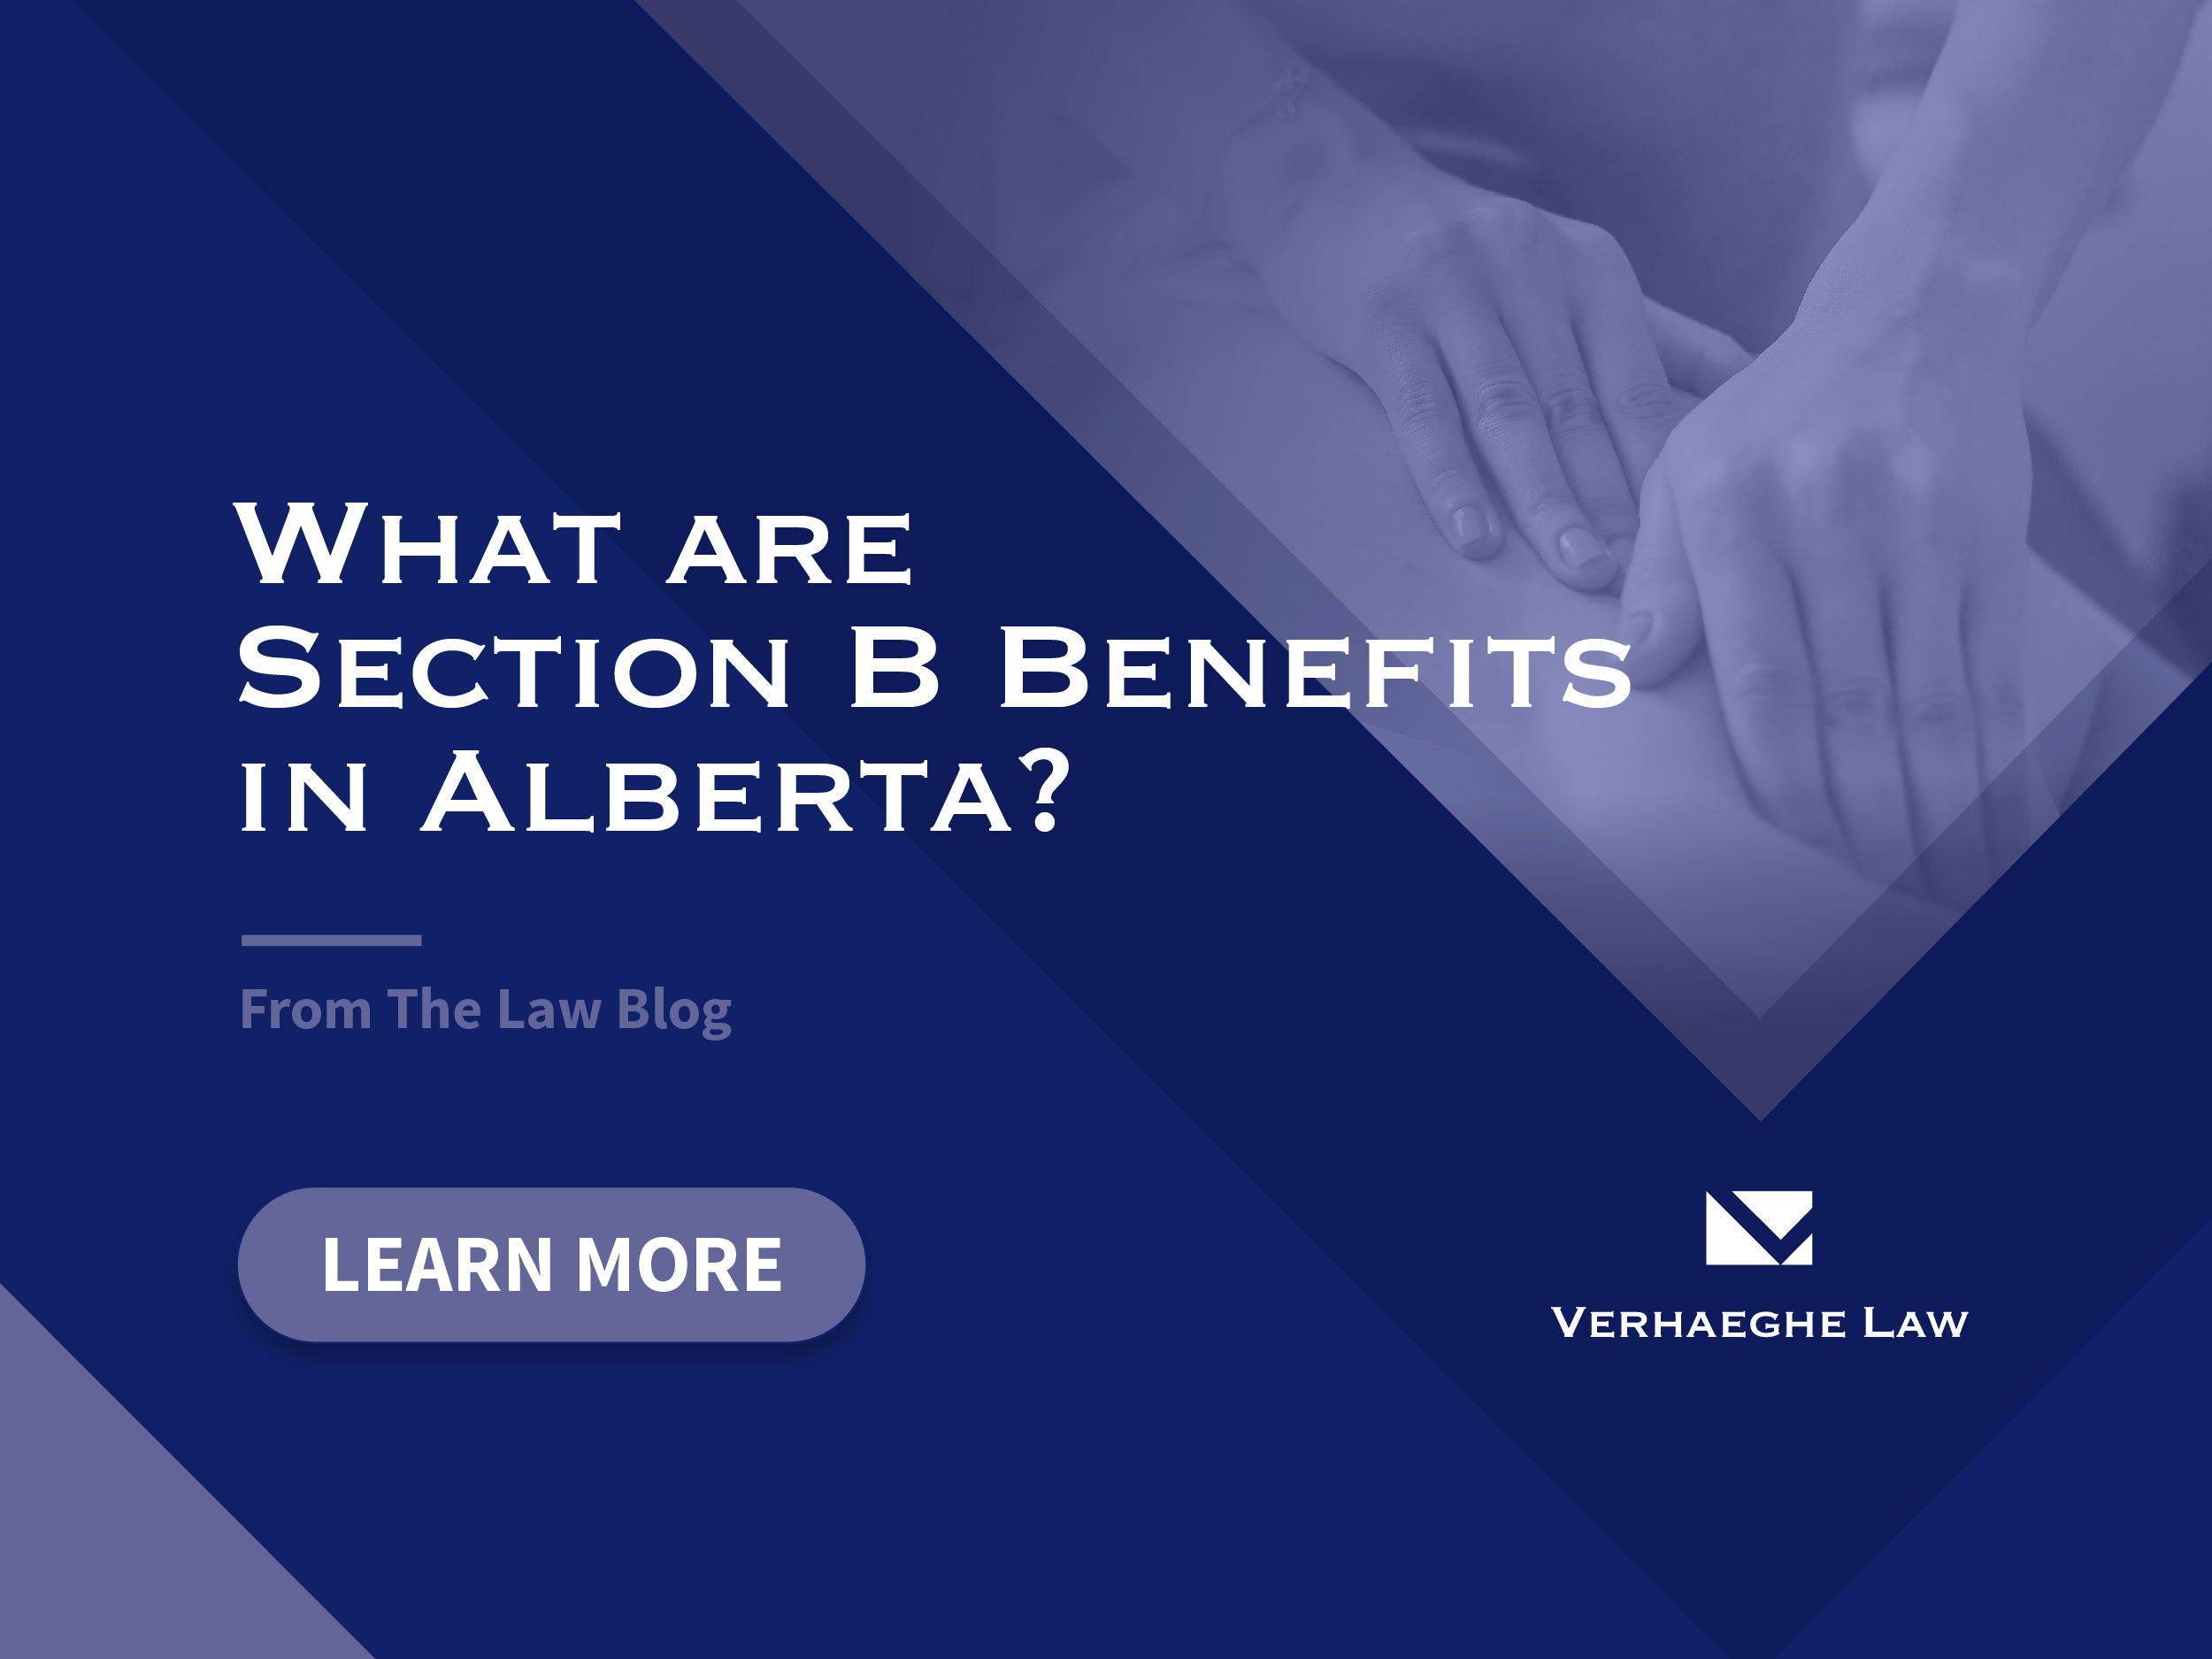 What are Section B Benefits in Alberta?